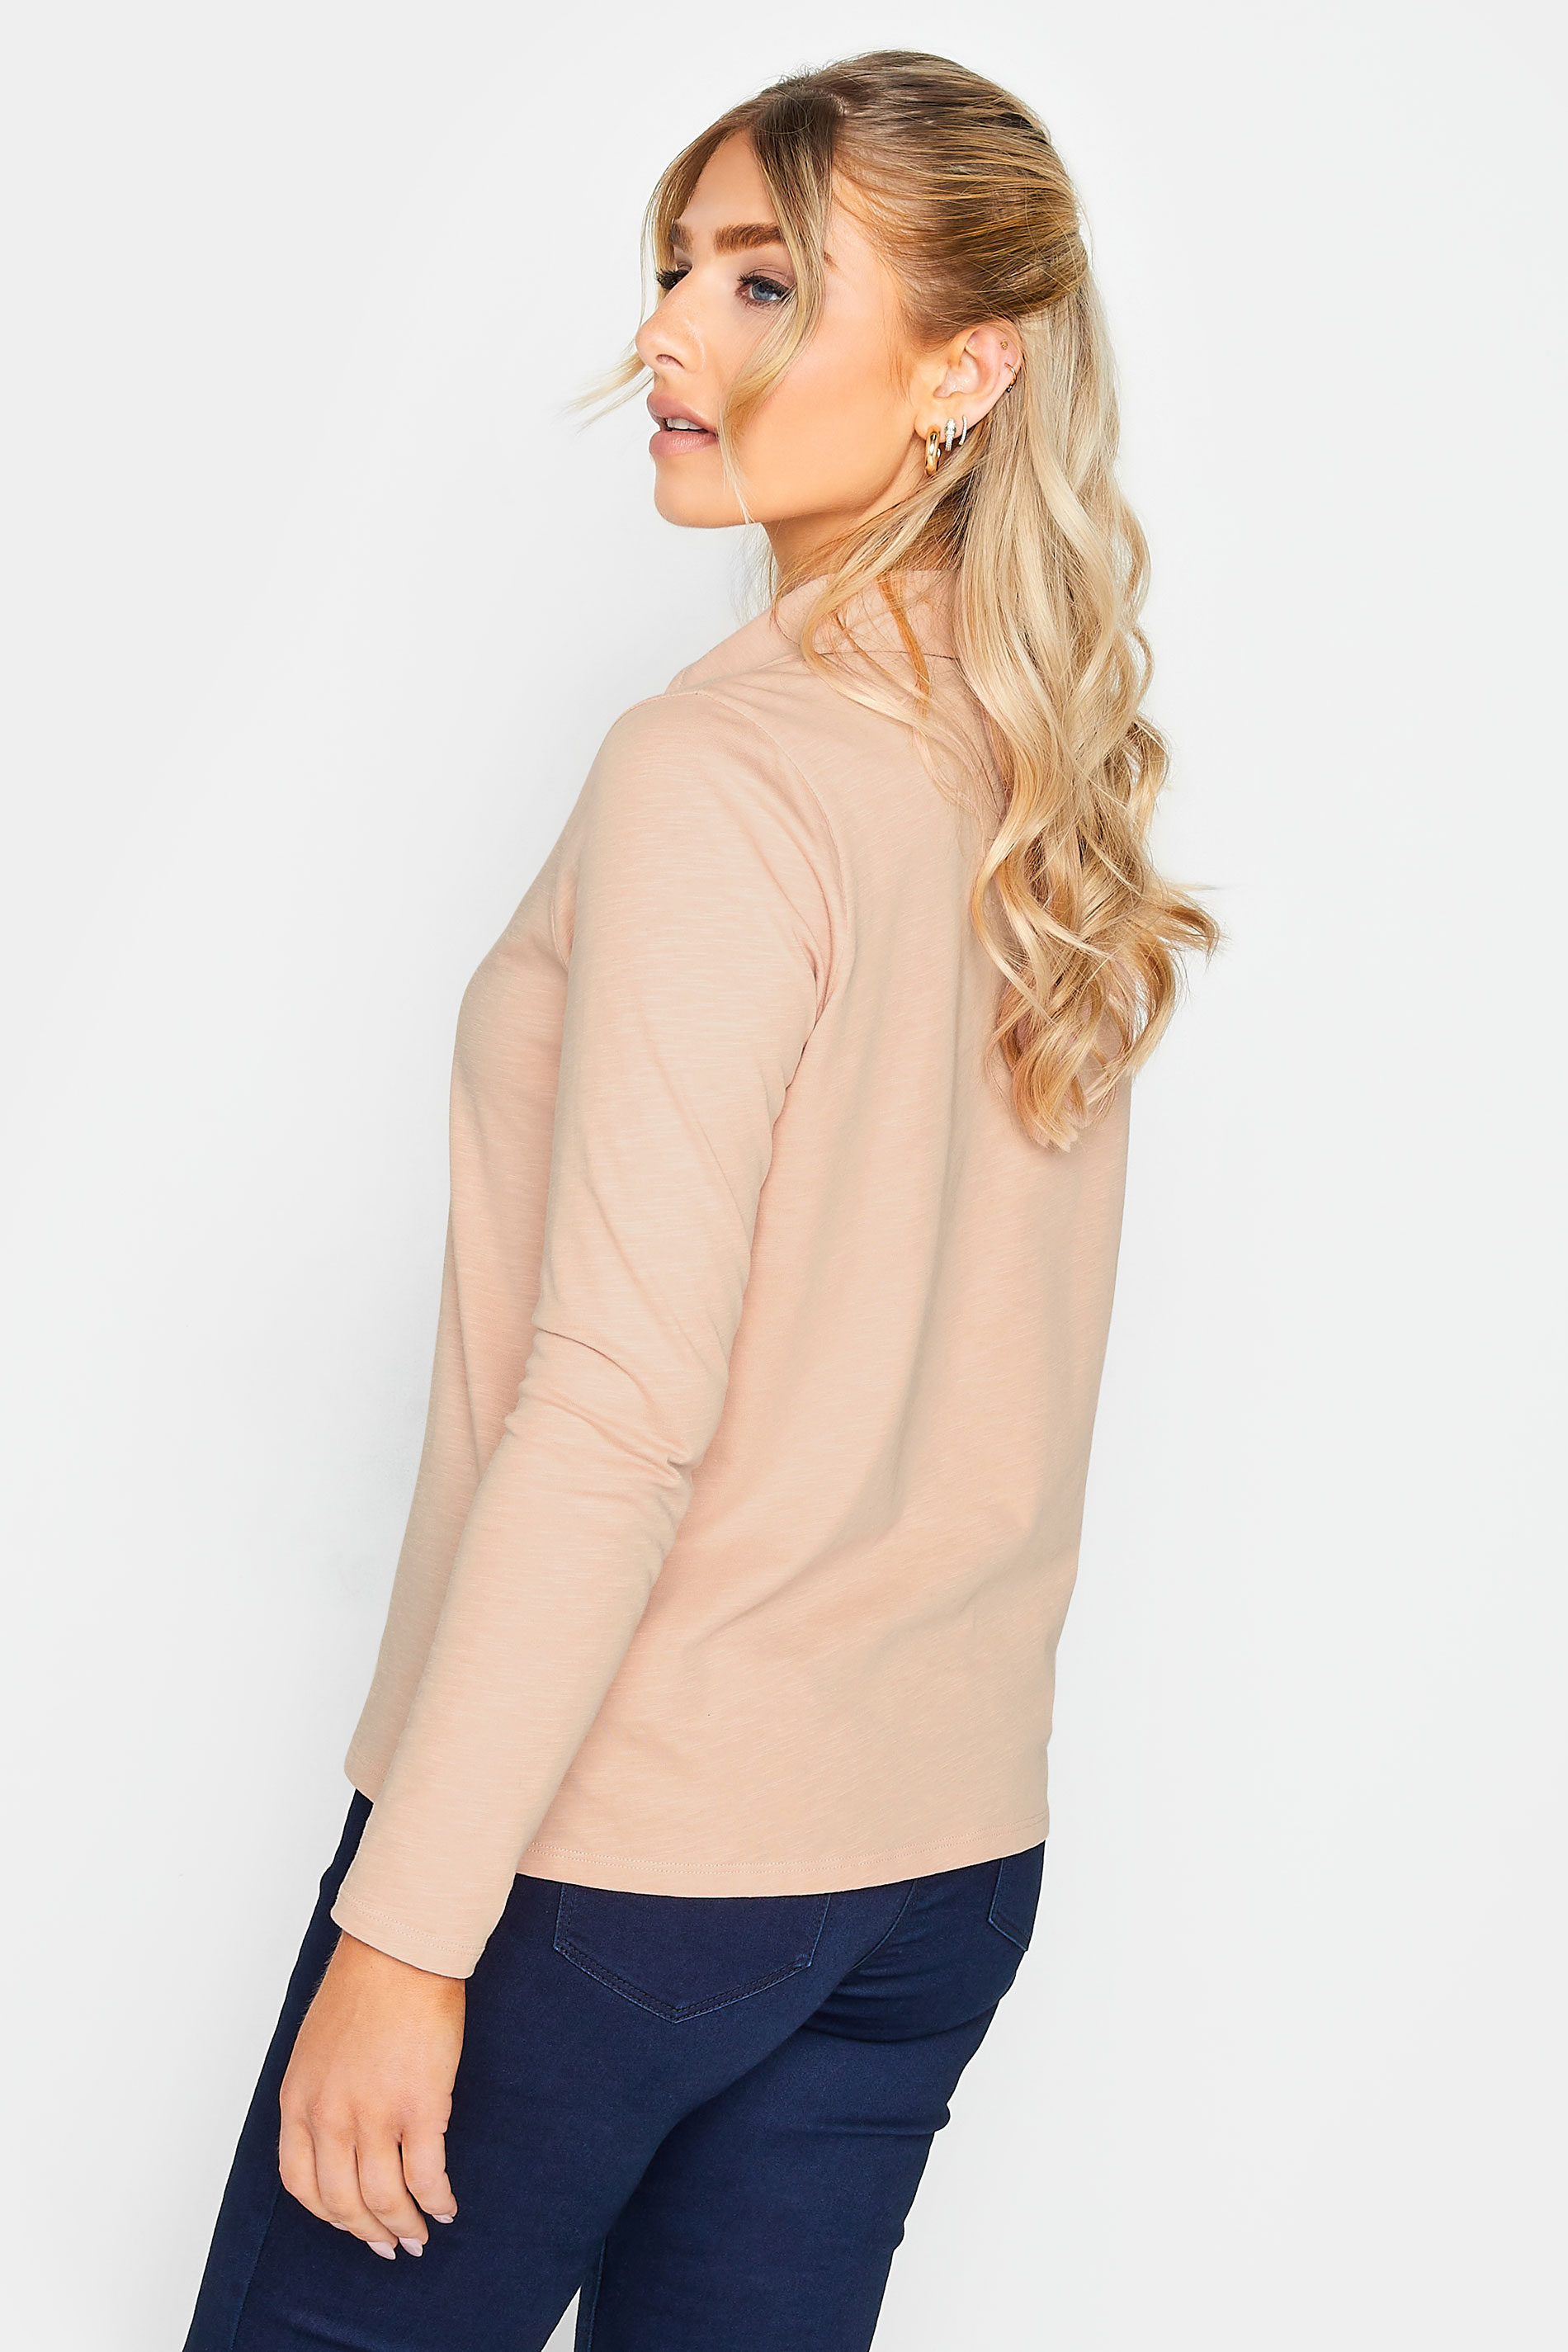 M&Co Blush Pink Collared Long Sleeve Cotton Top | M&Co 3